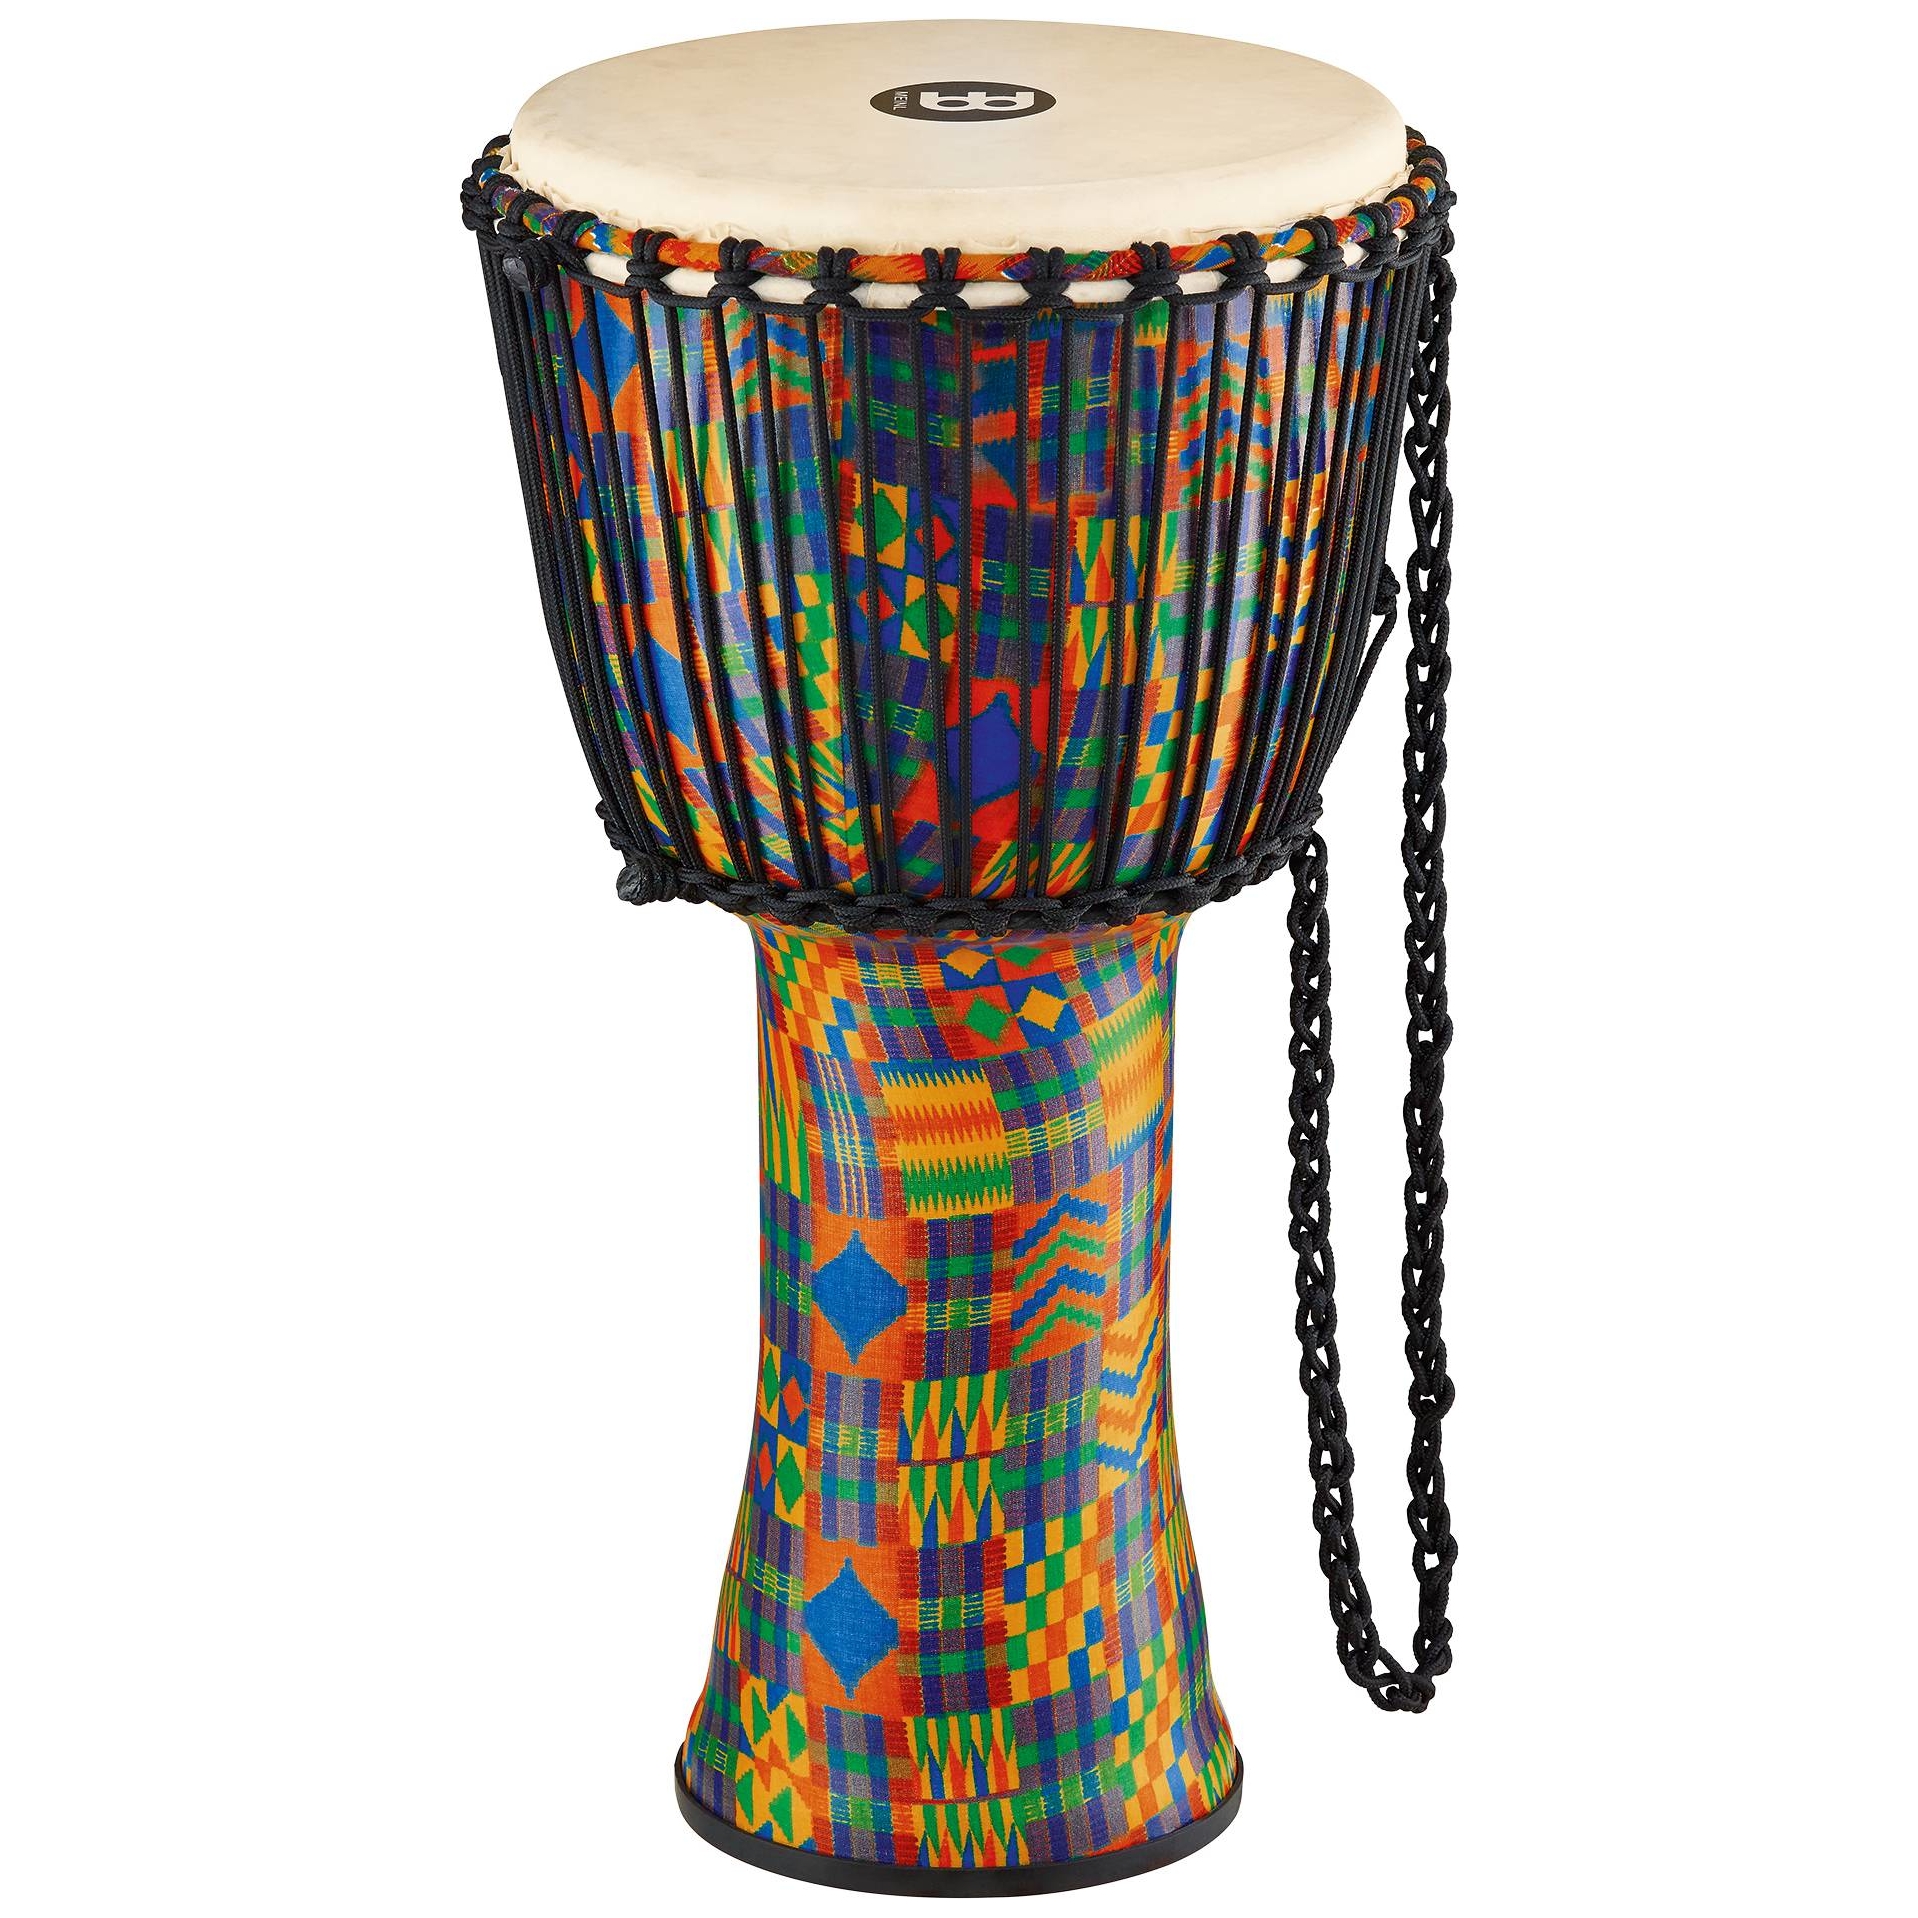 Meinl Percussion PADJ2-L-G - 12" Rope Tuned Travel Series Djembes, Goat Skin Head (Patented), Kenyan Quilt